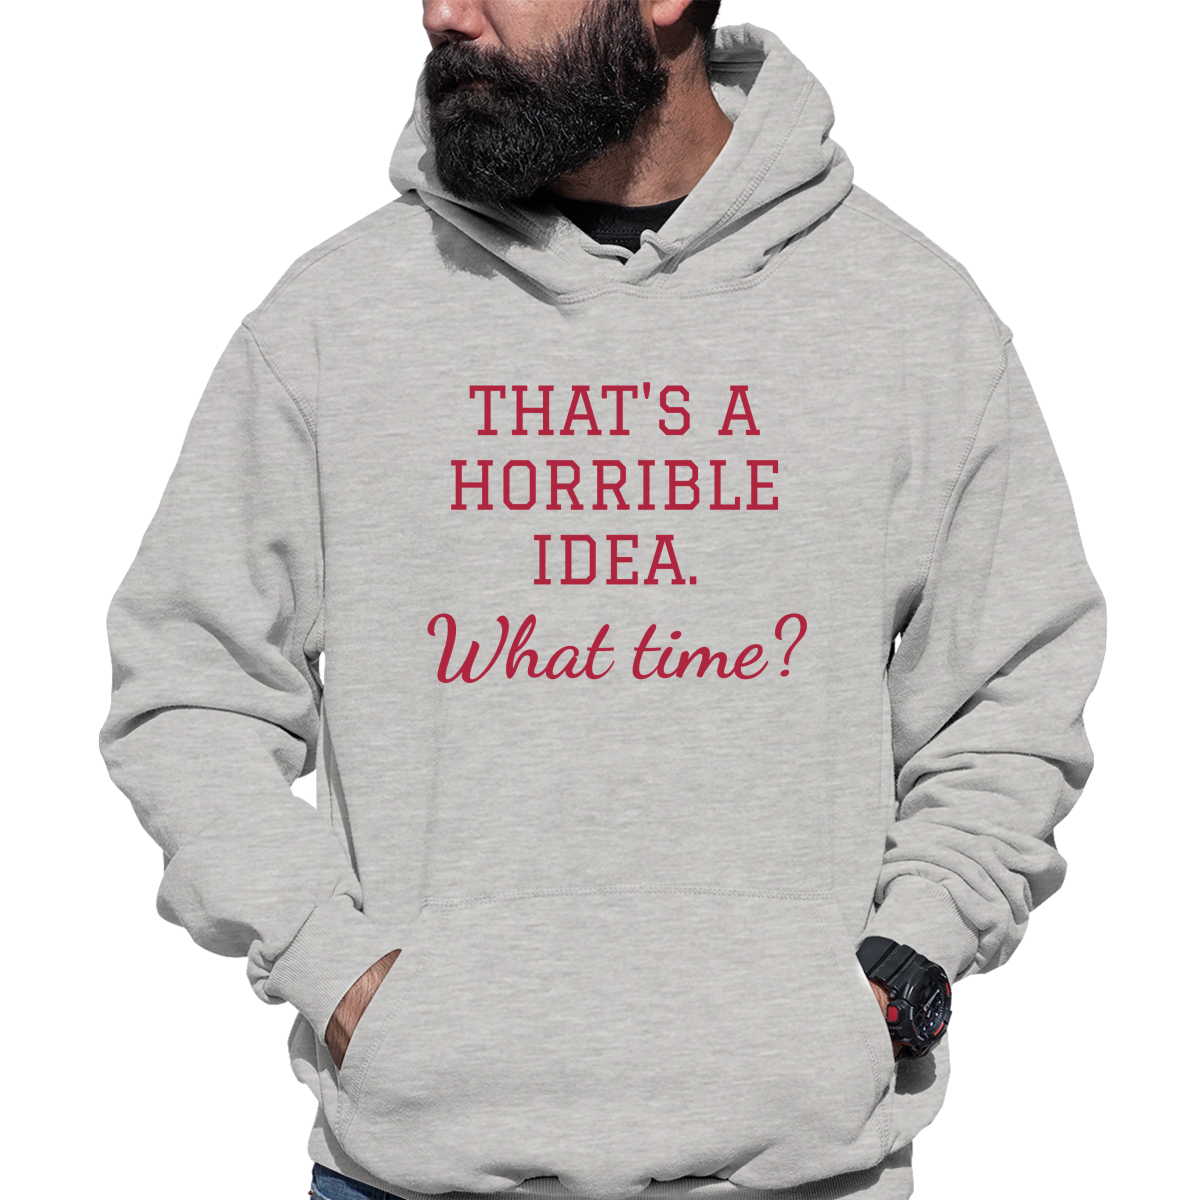 That's A Horrible Idea. What Time? Unisex Hoodie | Gray